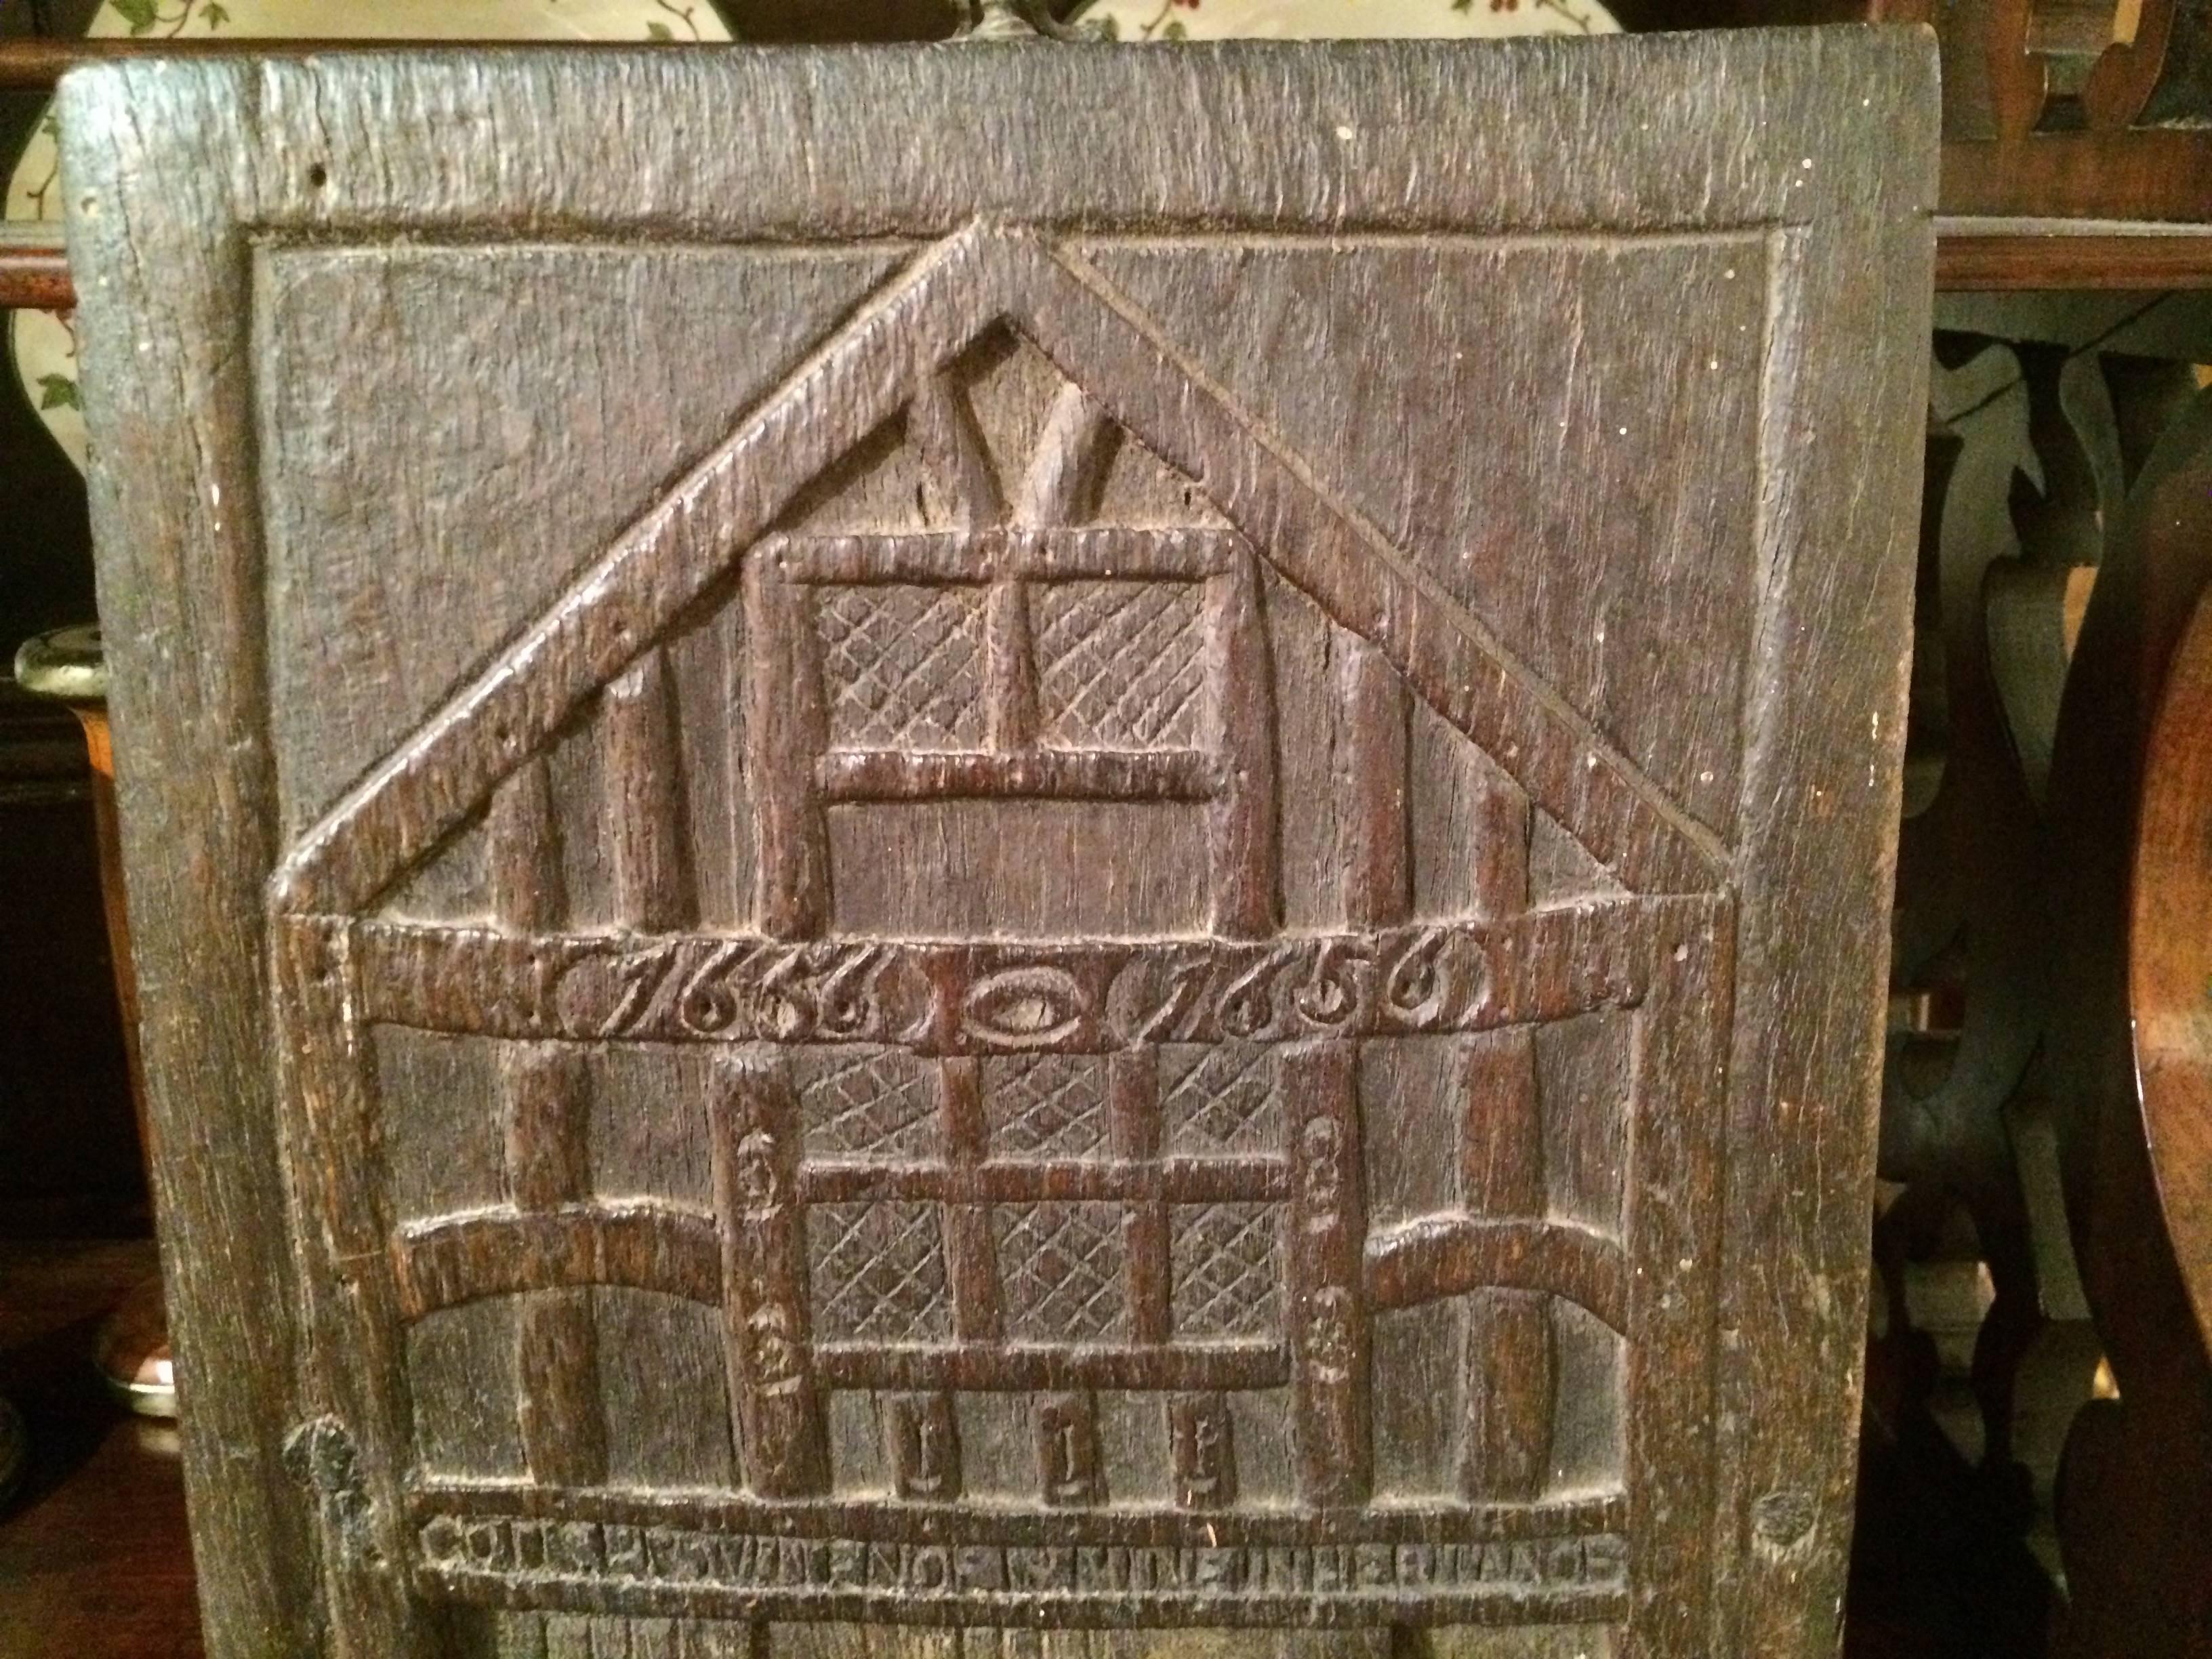 Chestnut panel carved in relief showing a model of 'God's Providence House' in Chester, England. 
Dated on the reverse in Roman numerals 1710.

The original building on the site was constructed in the 13th century but the present house was built